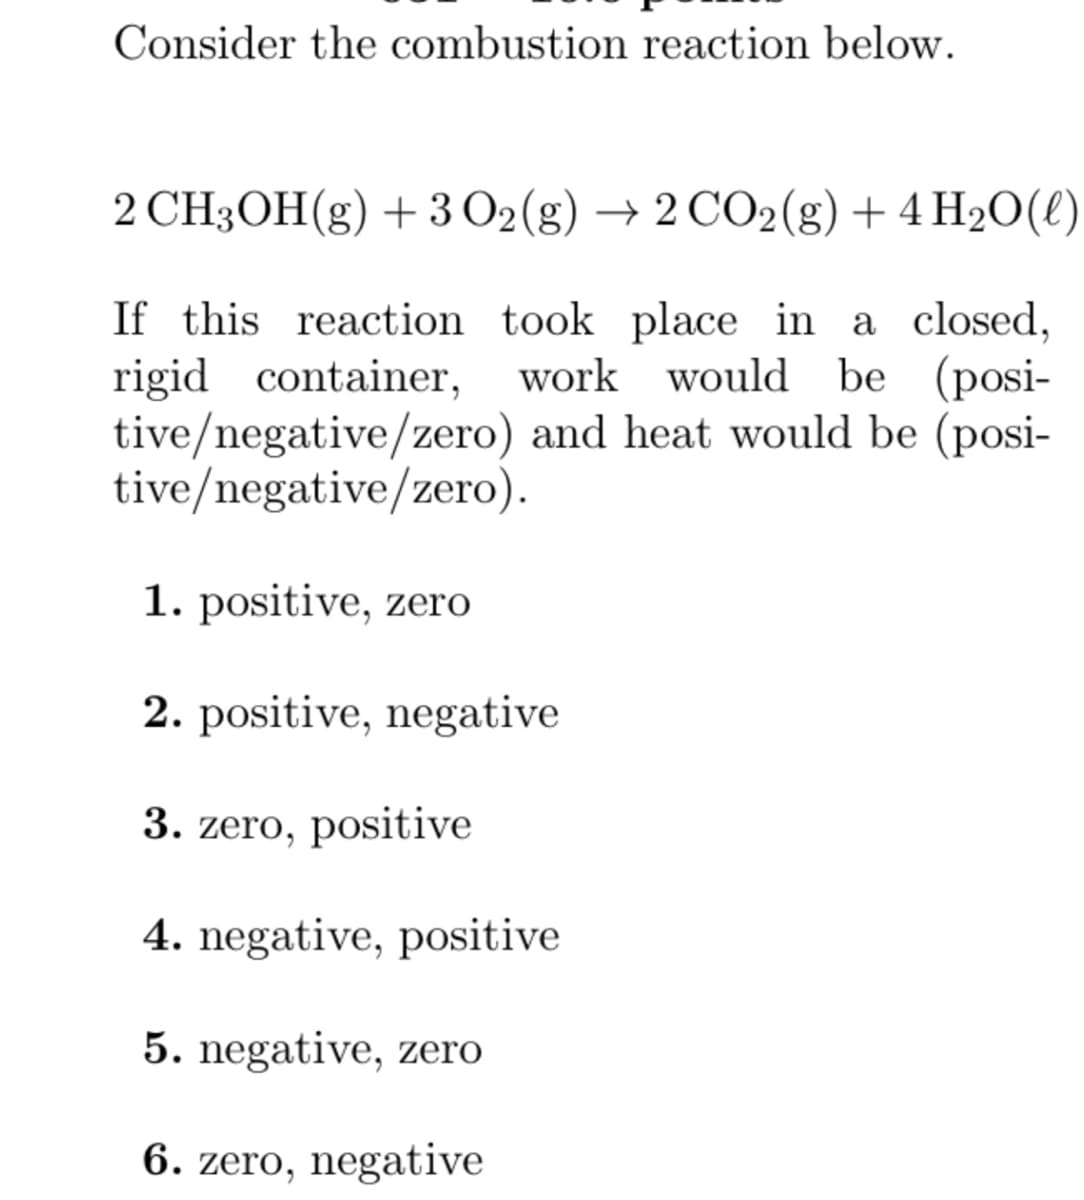 Consider the combustion reaction below.
2 CH3OH(g) + 3 O2(g) → 2 CO2(g) + 4H₂O(l)
If this reaction took place in a closed,
rigid container, work would be (posi-
tive/negative/zero) and heat would be (posi-
tive/negative/zero).
1. positive, zero
2. positive, negative
3. zero, positive
4. negative, positive
5. negative, zero
6. zero, negative